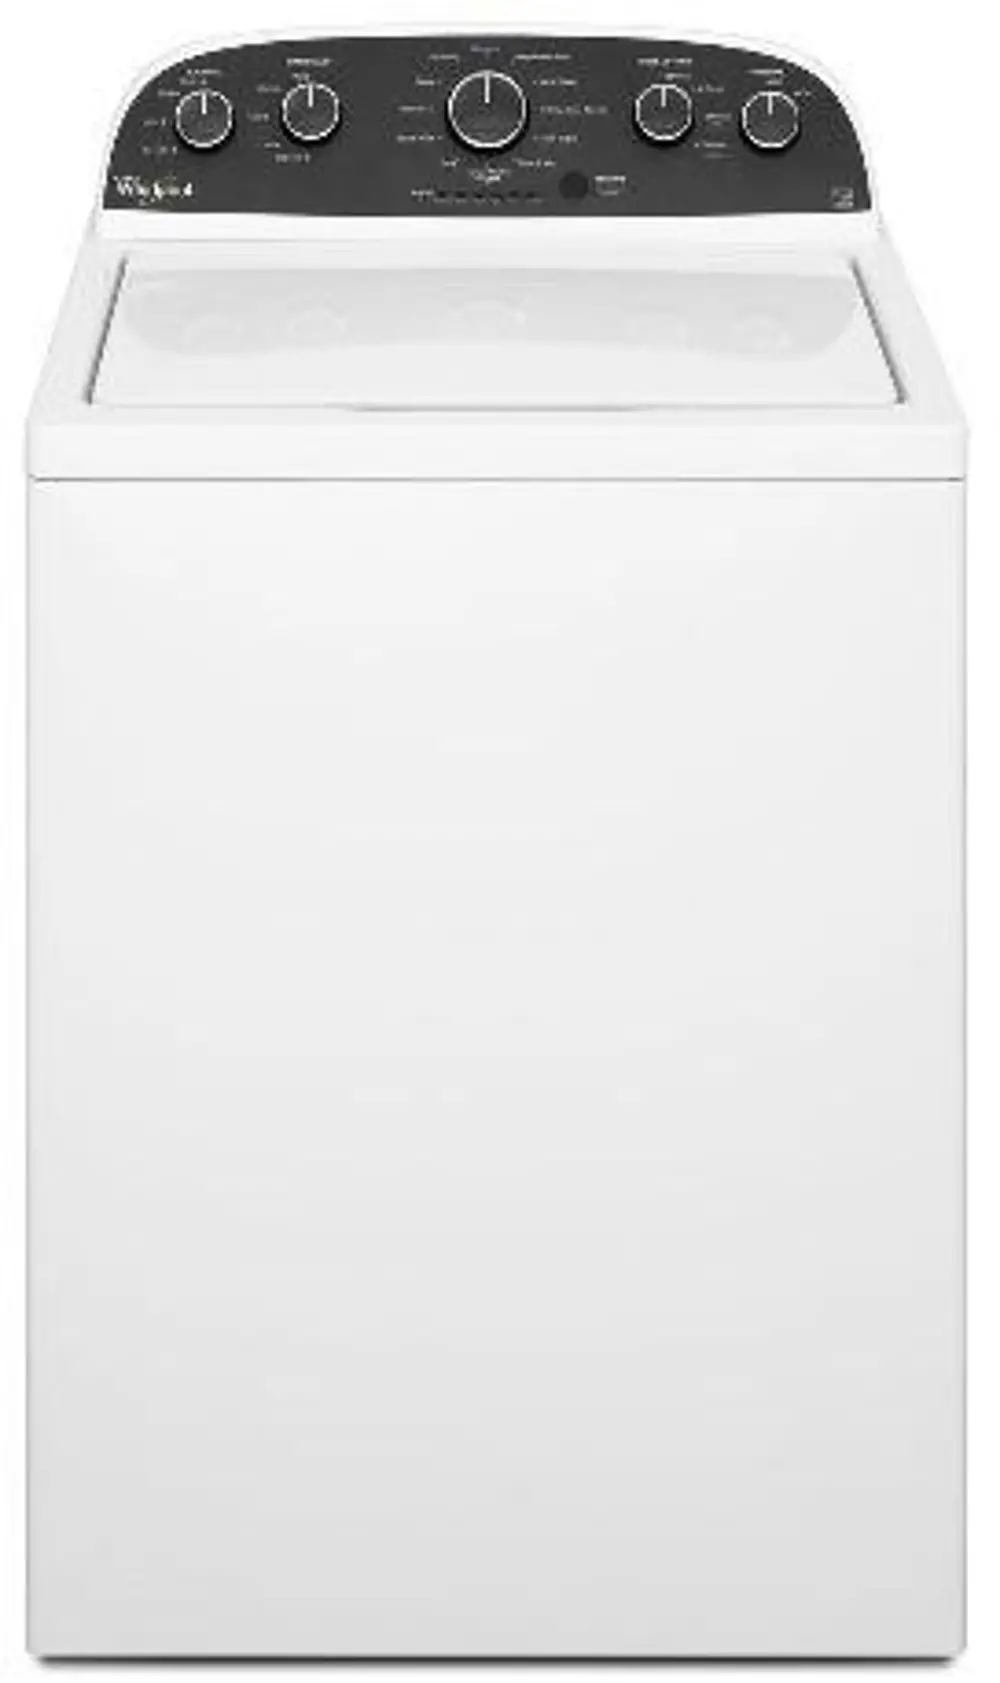 WTW4850BW Whirlpool 3.6 Cu. Ft. Top-load Washer-1